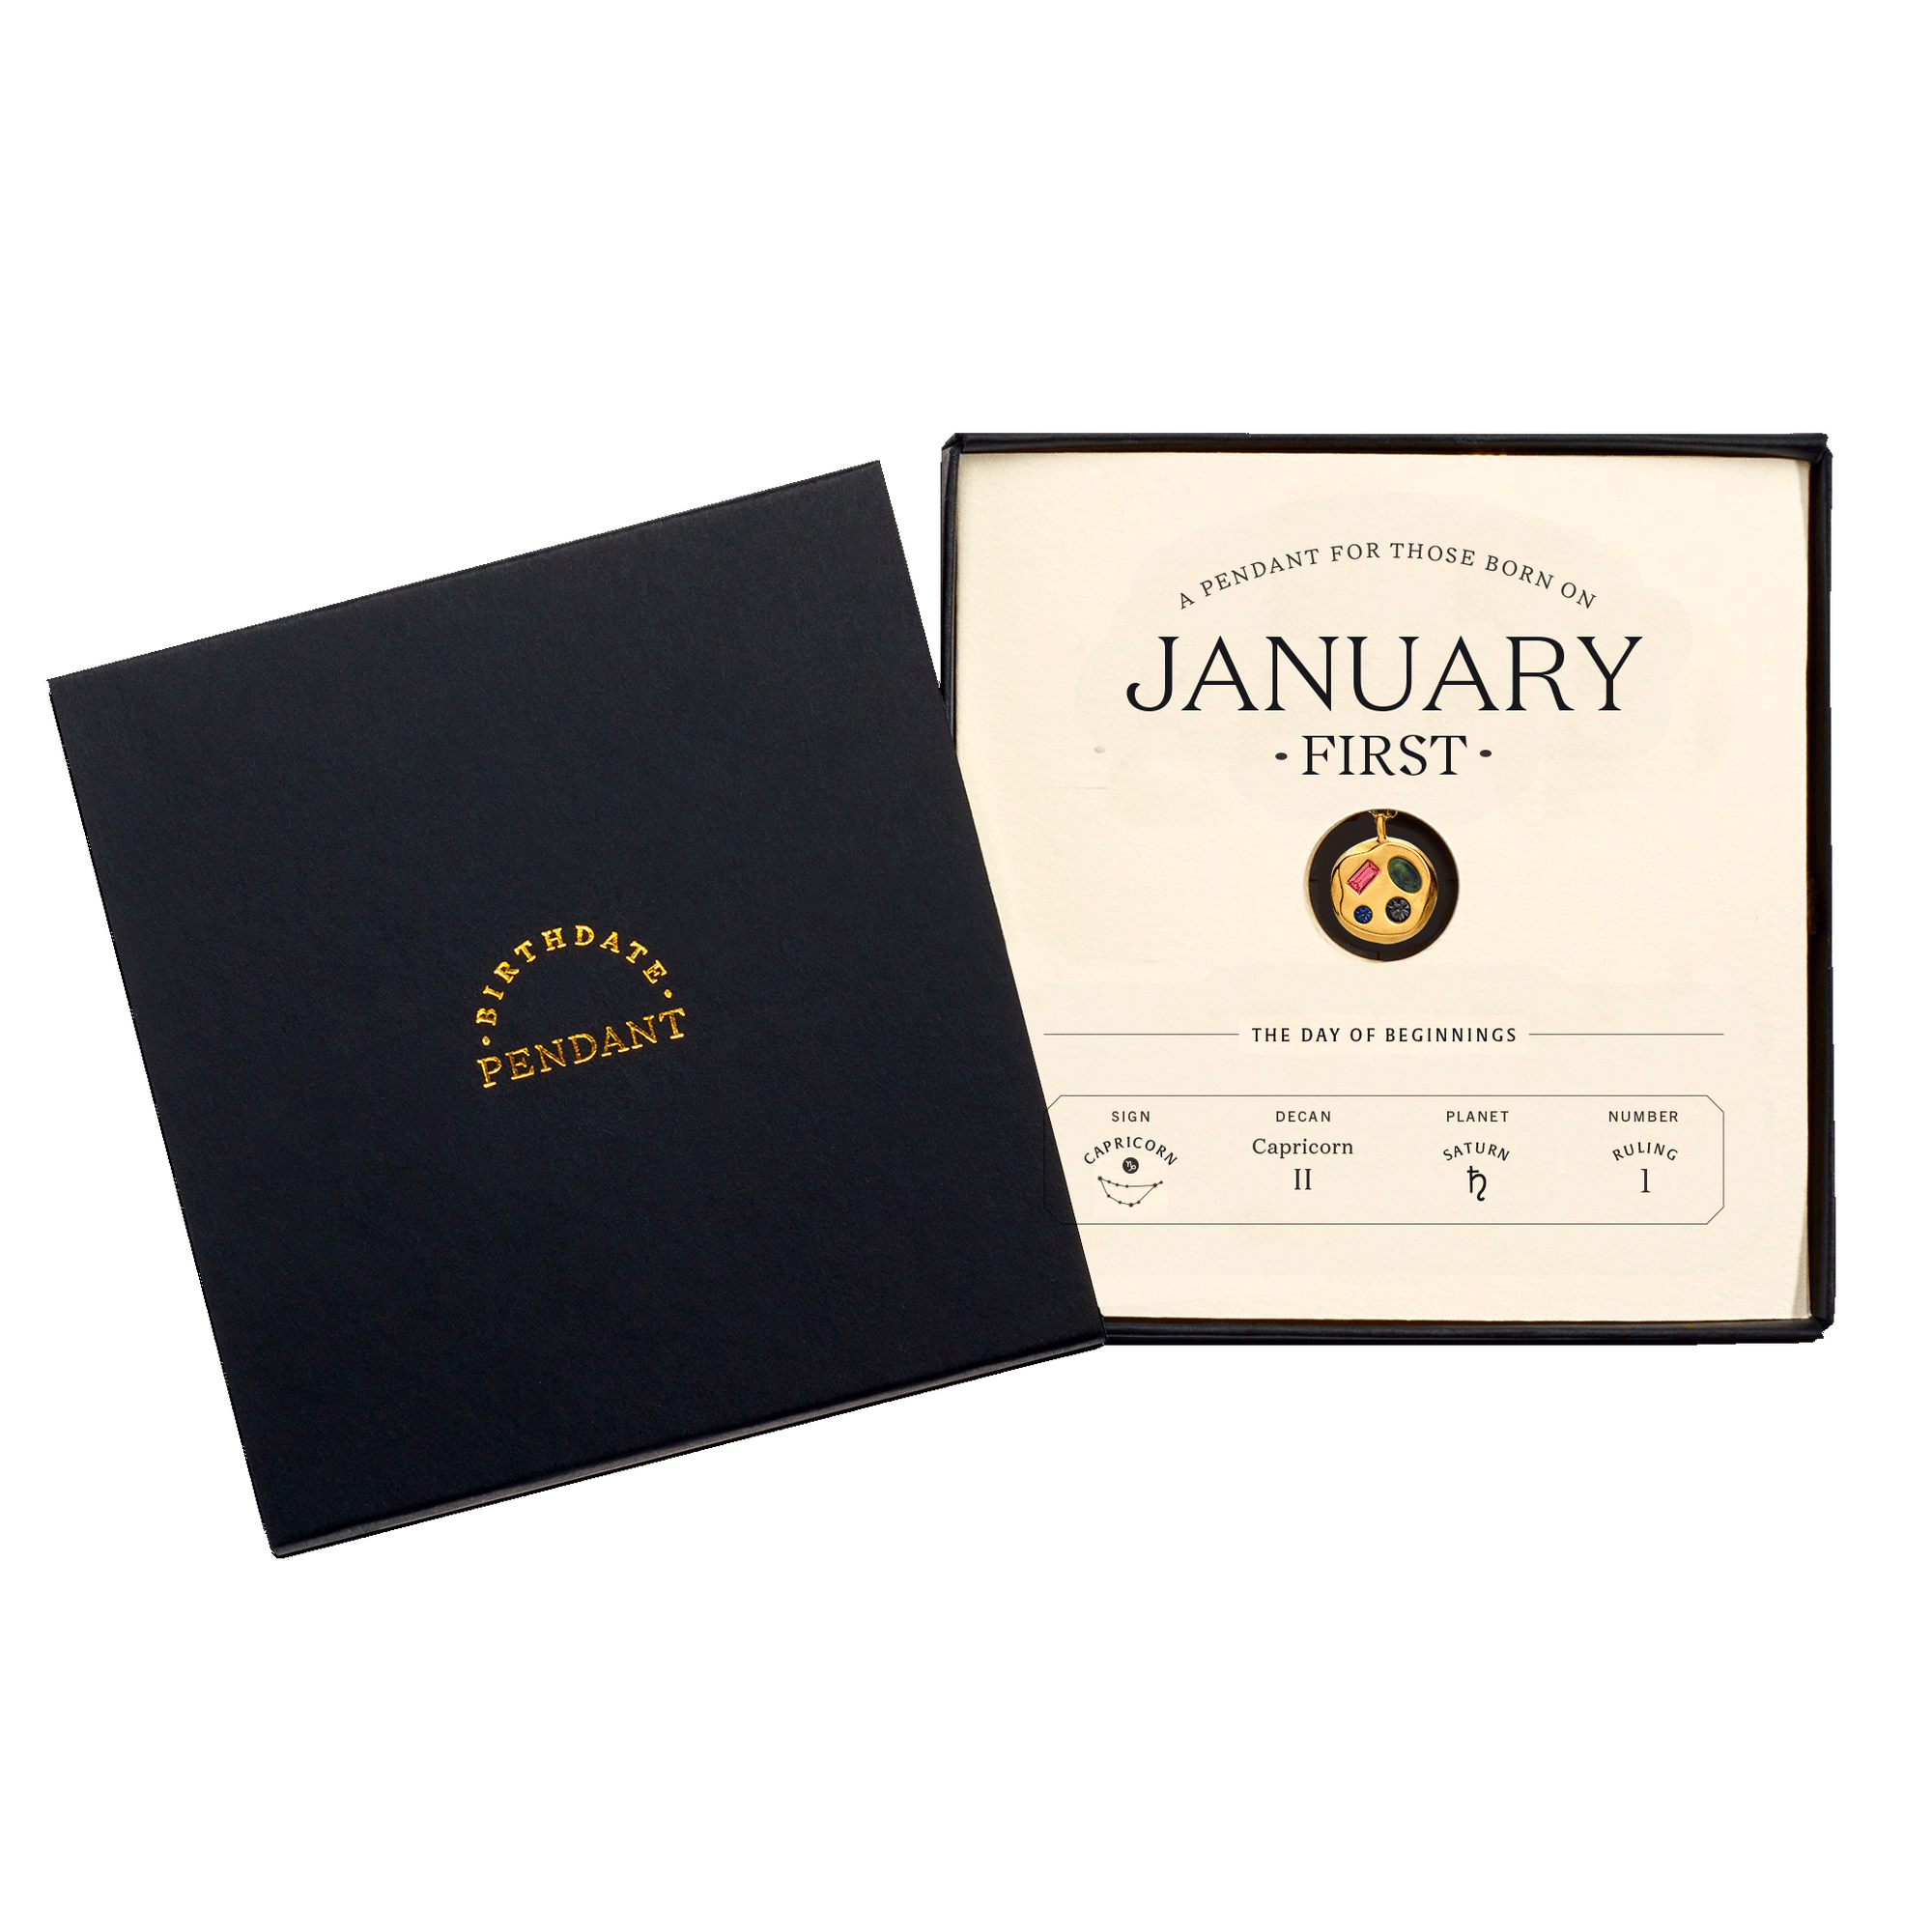 The January First Pendant inside its box